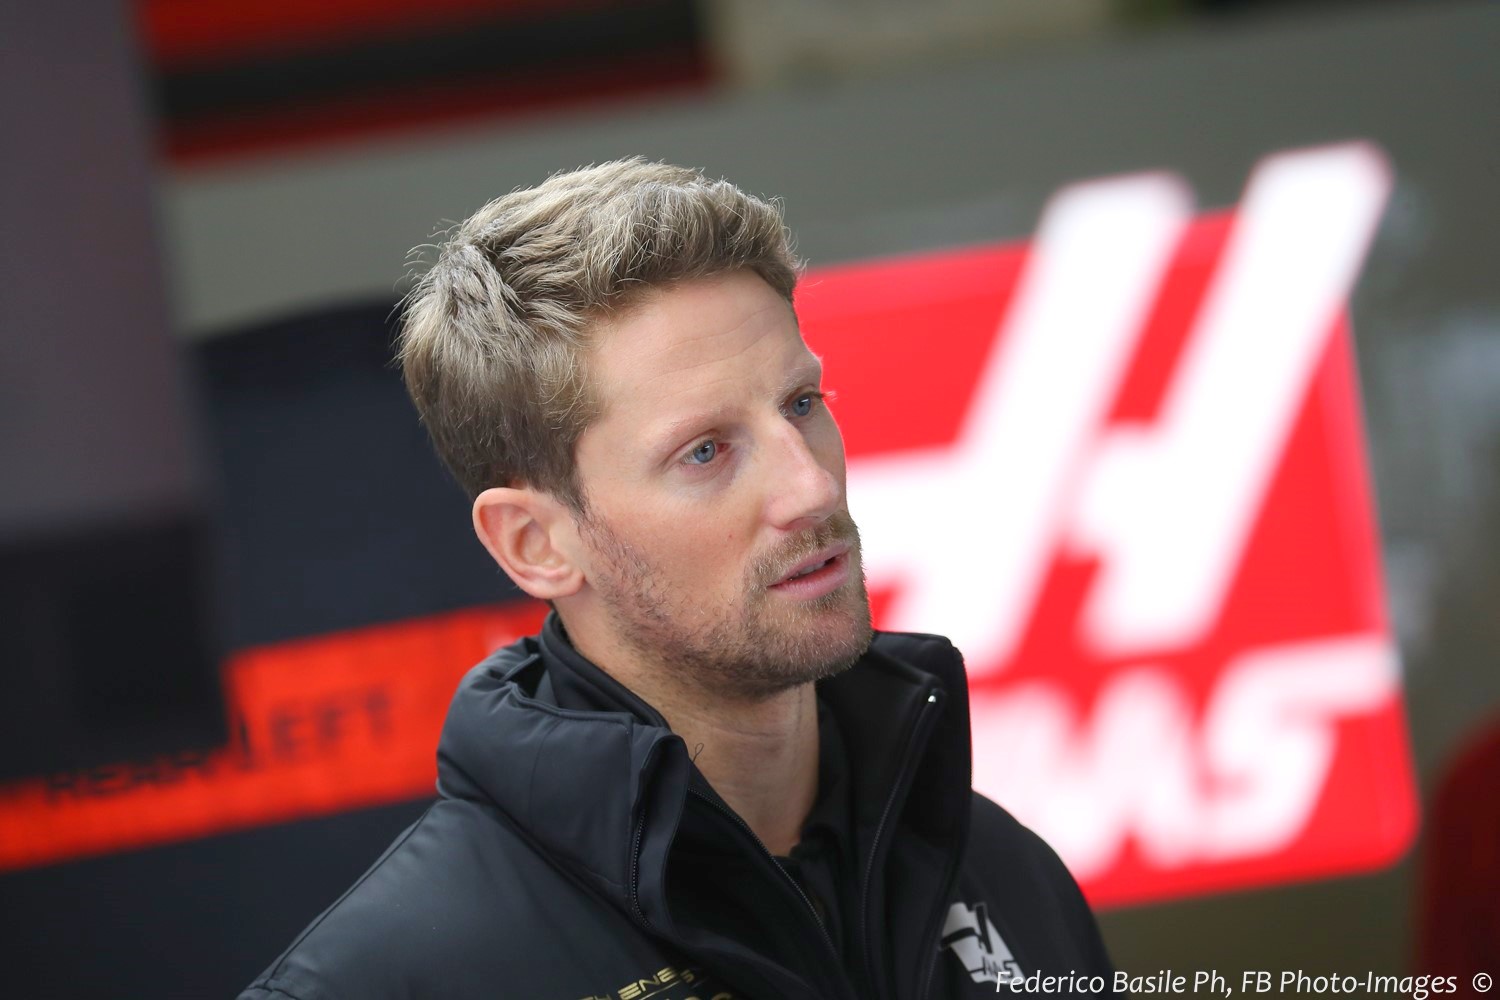 With the loss of Rich Energy as a sponsor, the Haas team took Grosjean's big check